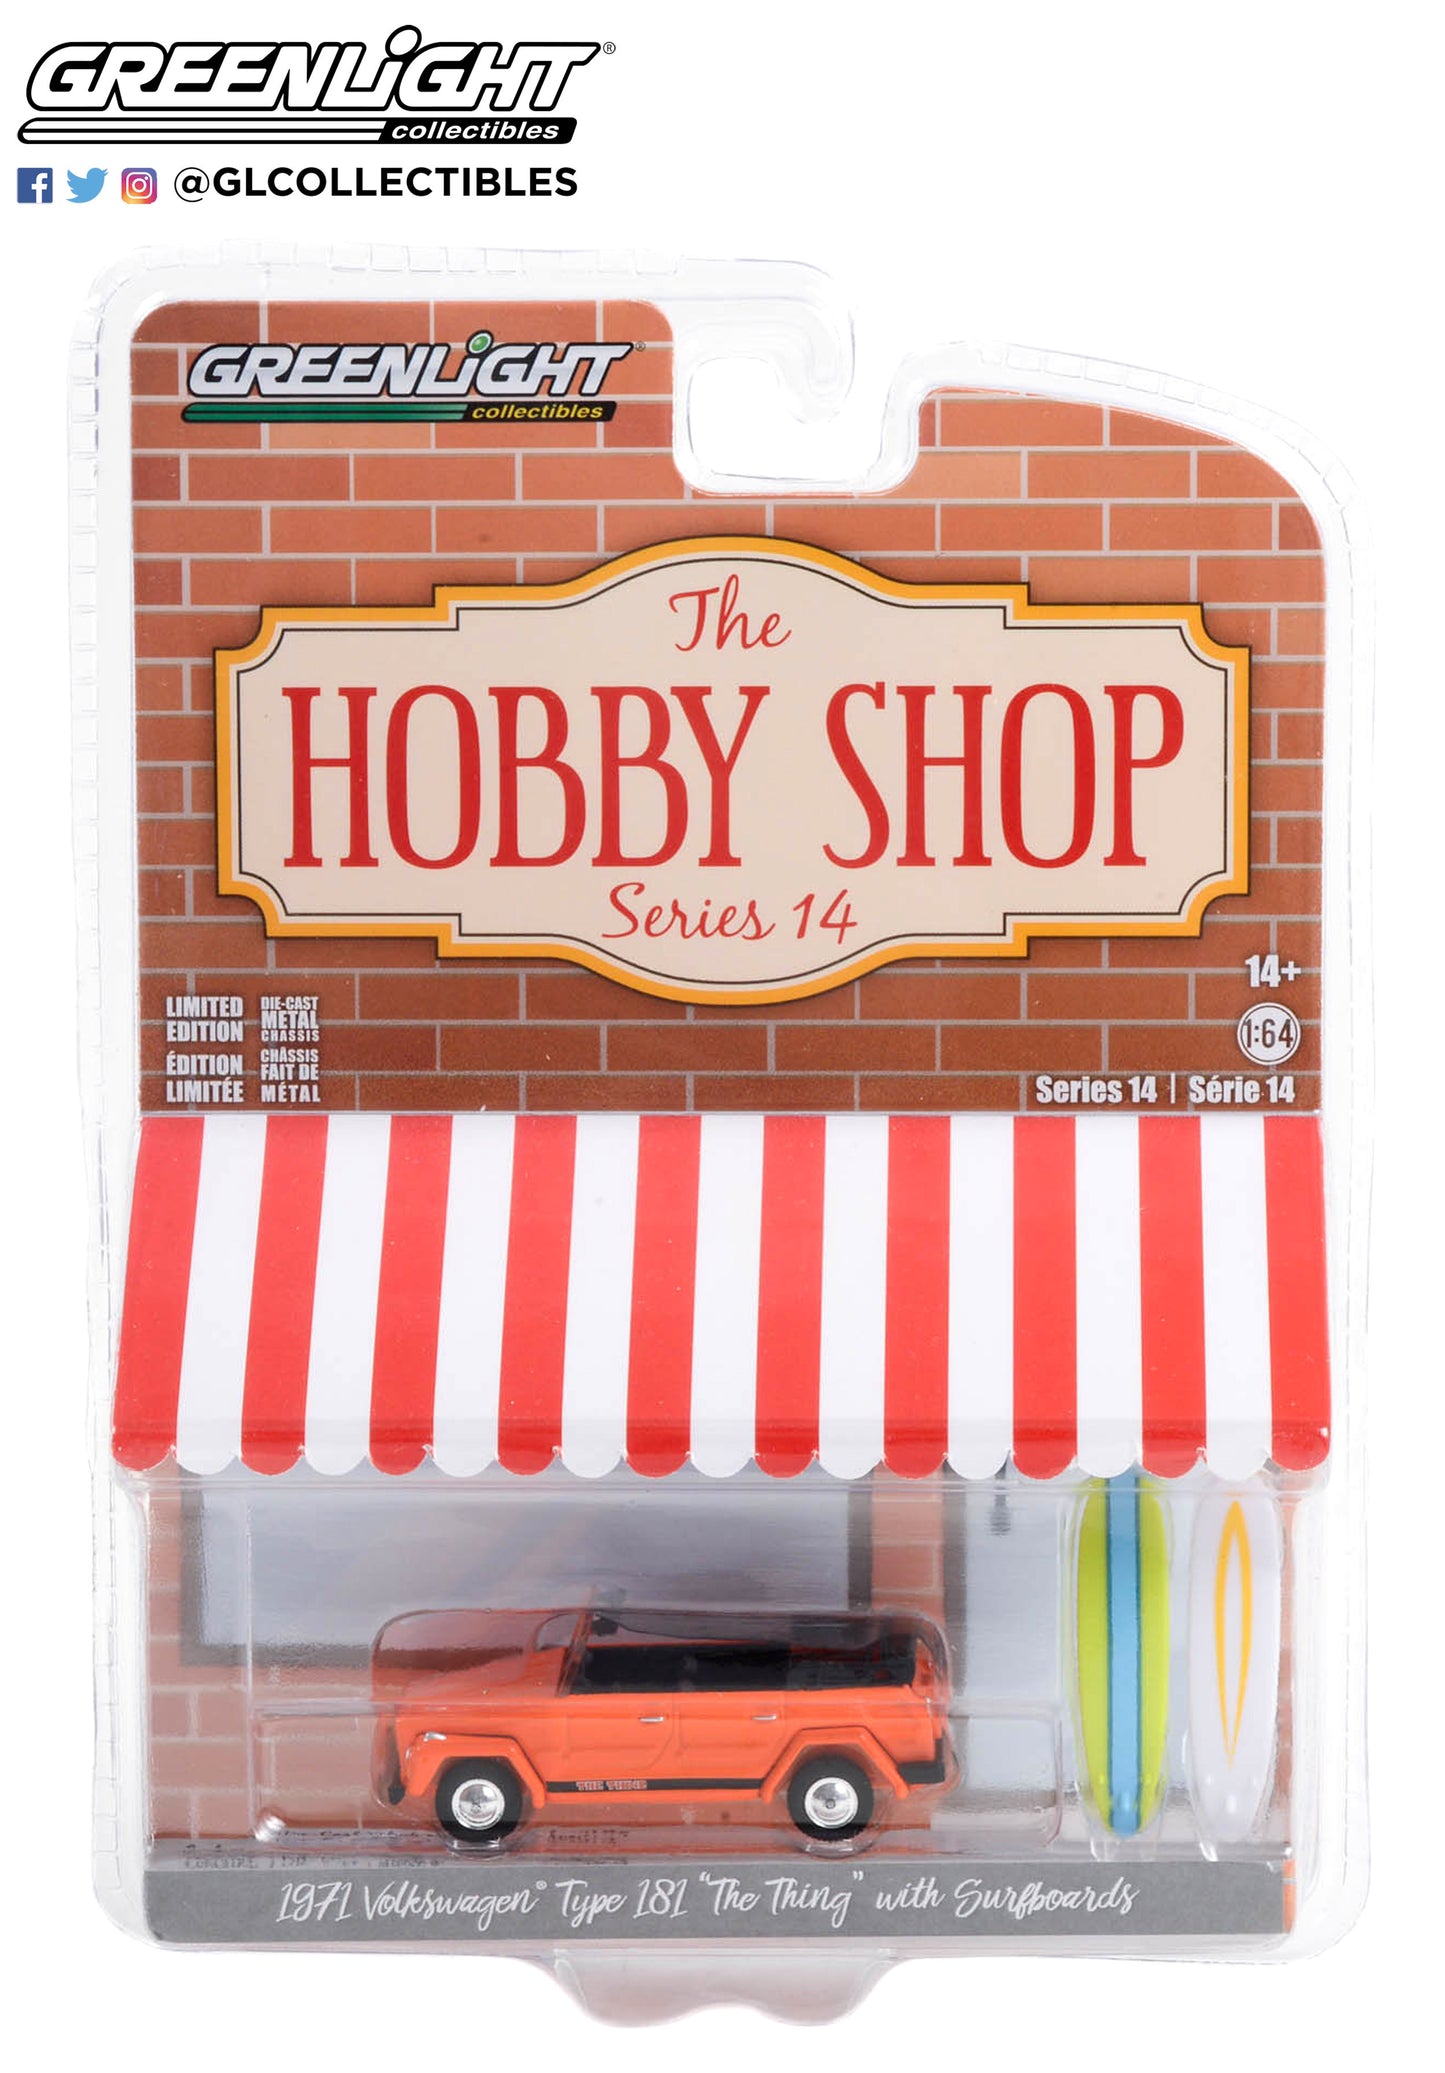 GreenLight 1:64 The Hobby Shop Series 14 - 1971 Volkswagen Thing (Type 181) The Thing with Surfboards 97140-C